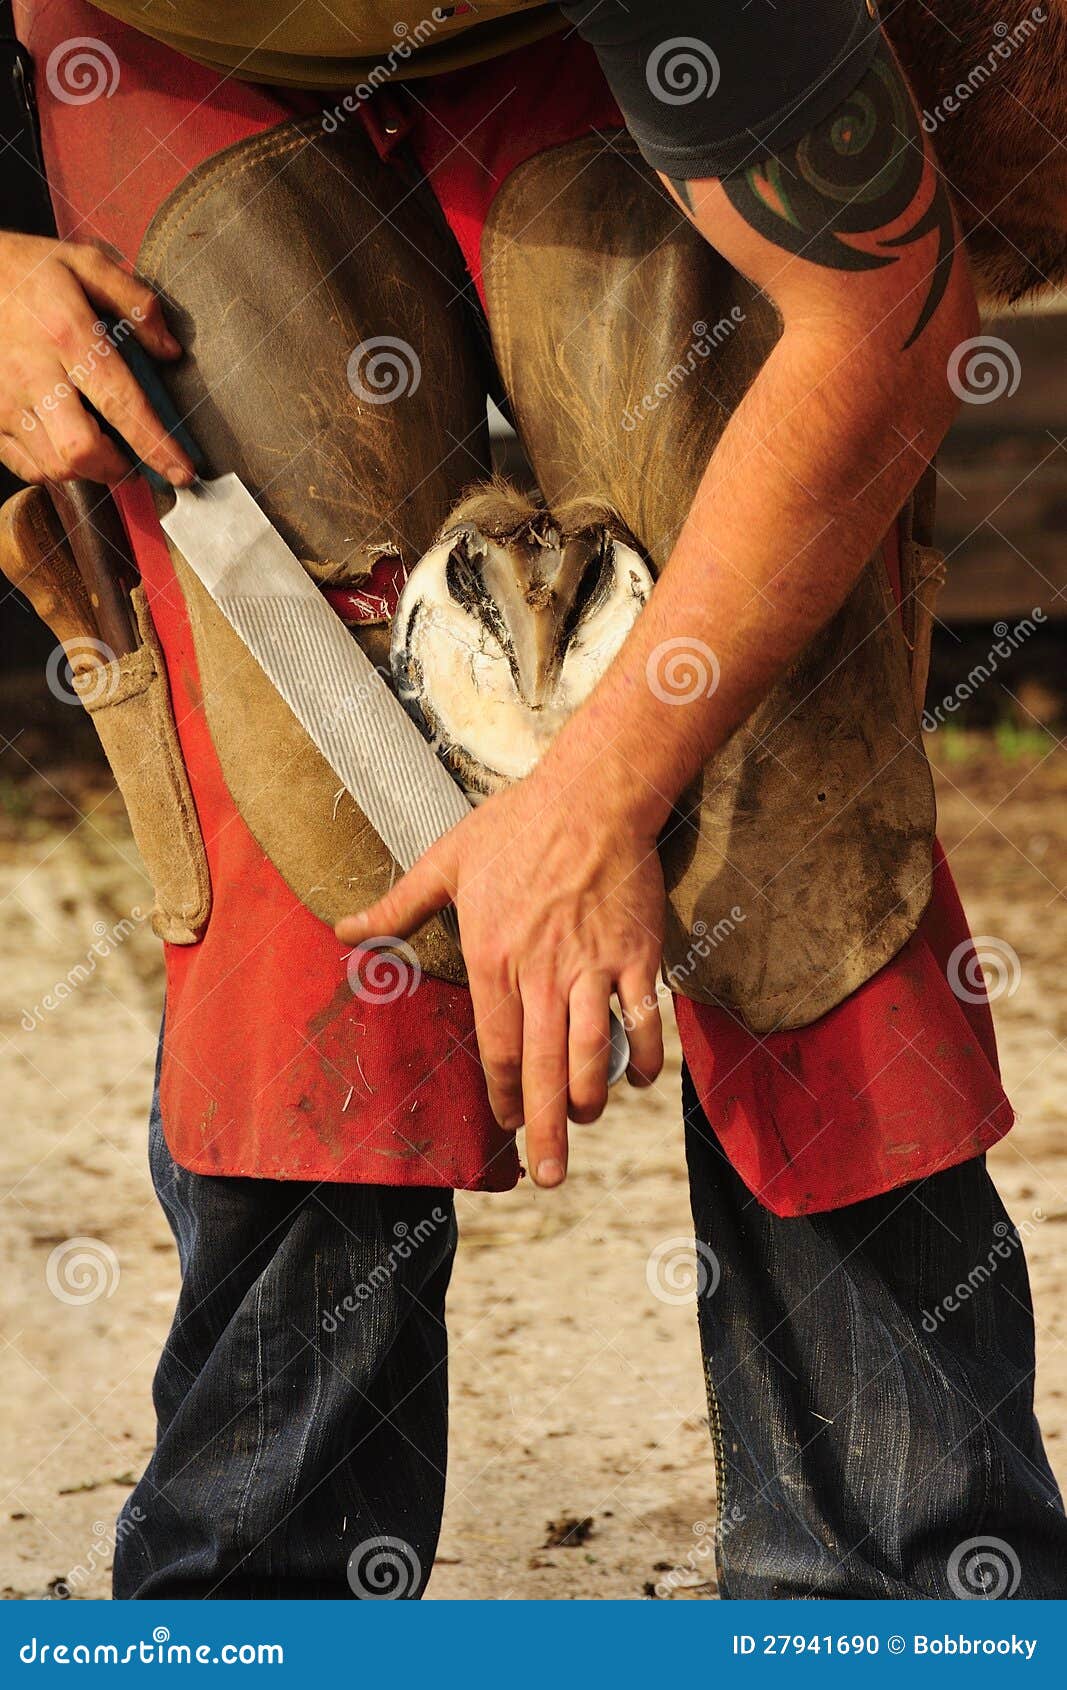 The Farrier, Rasping The Hoof Stock Photo - Image: 27941690